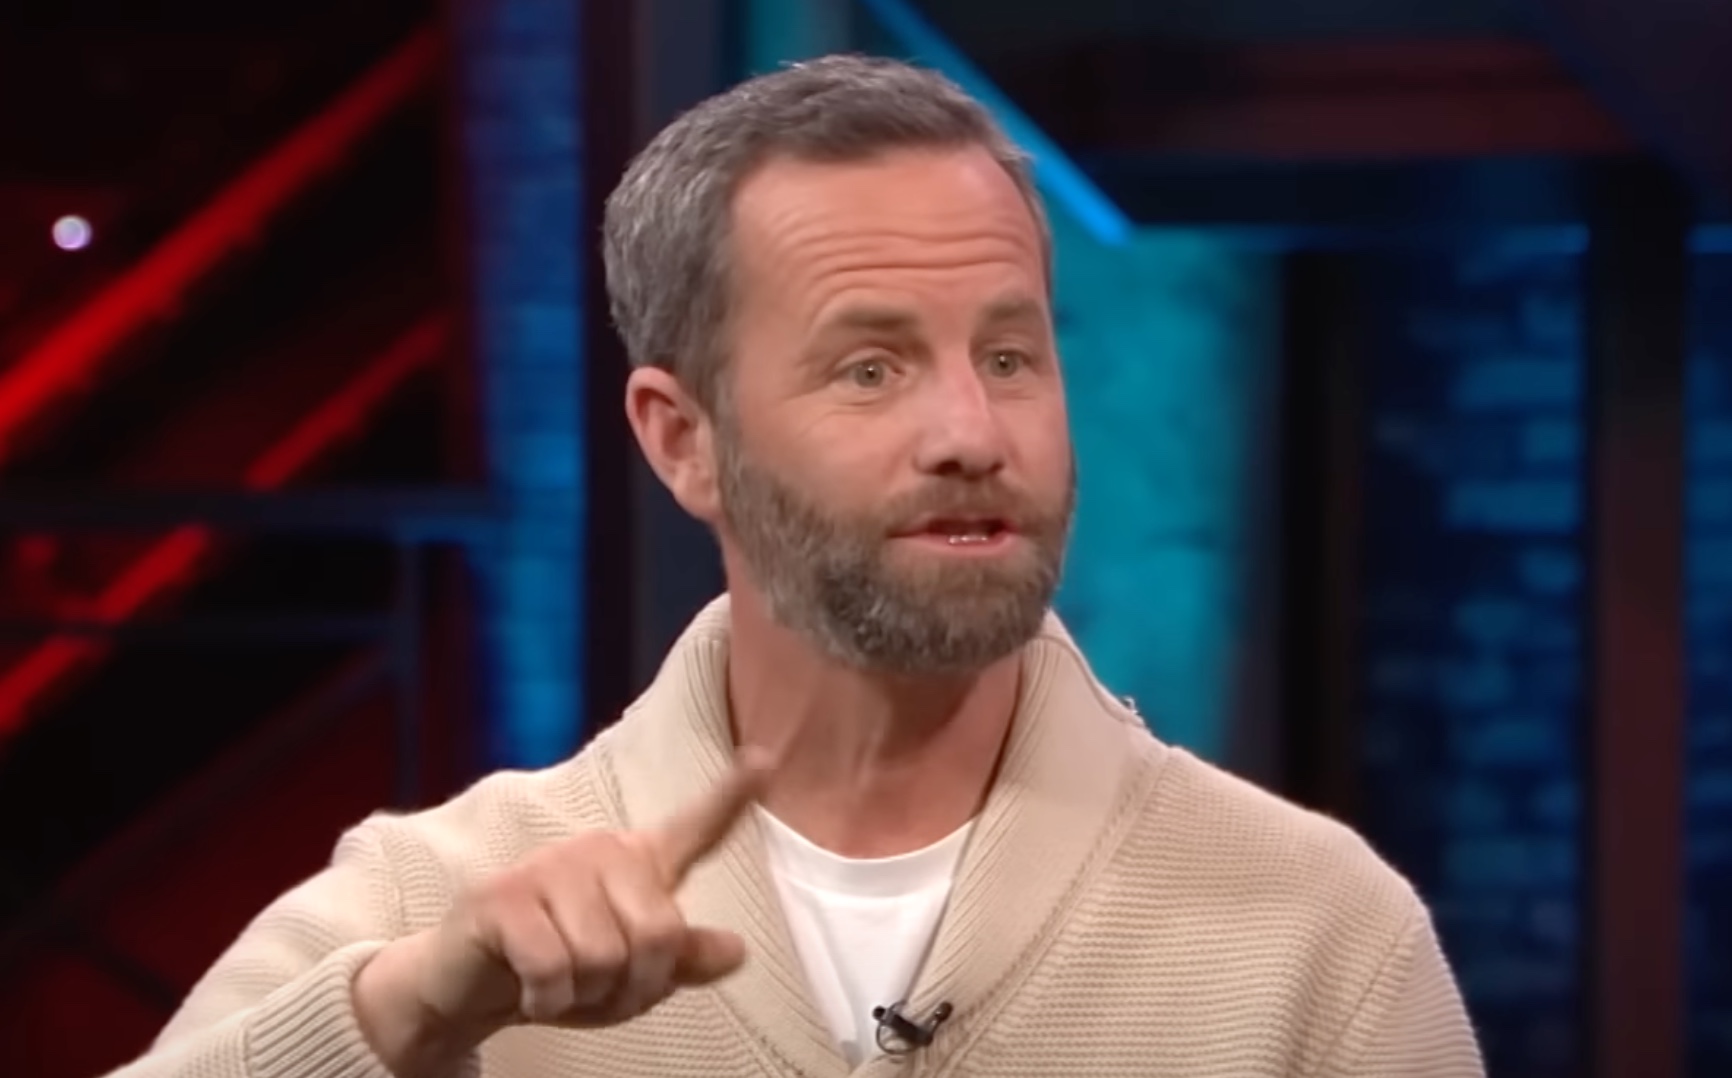 Kirk Cameron Calls Out Scholastic Books For Glamorizing Gender Transitioning